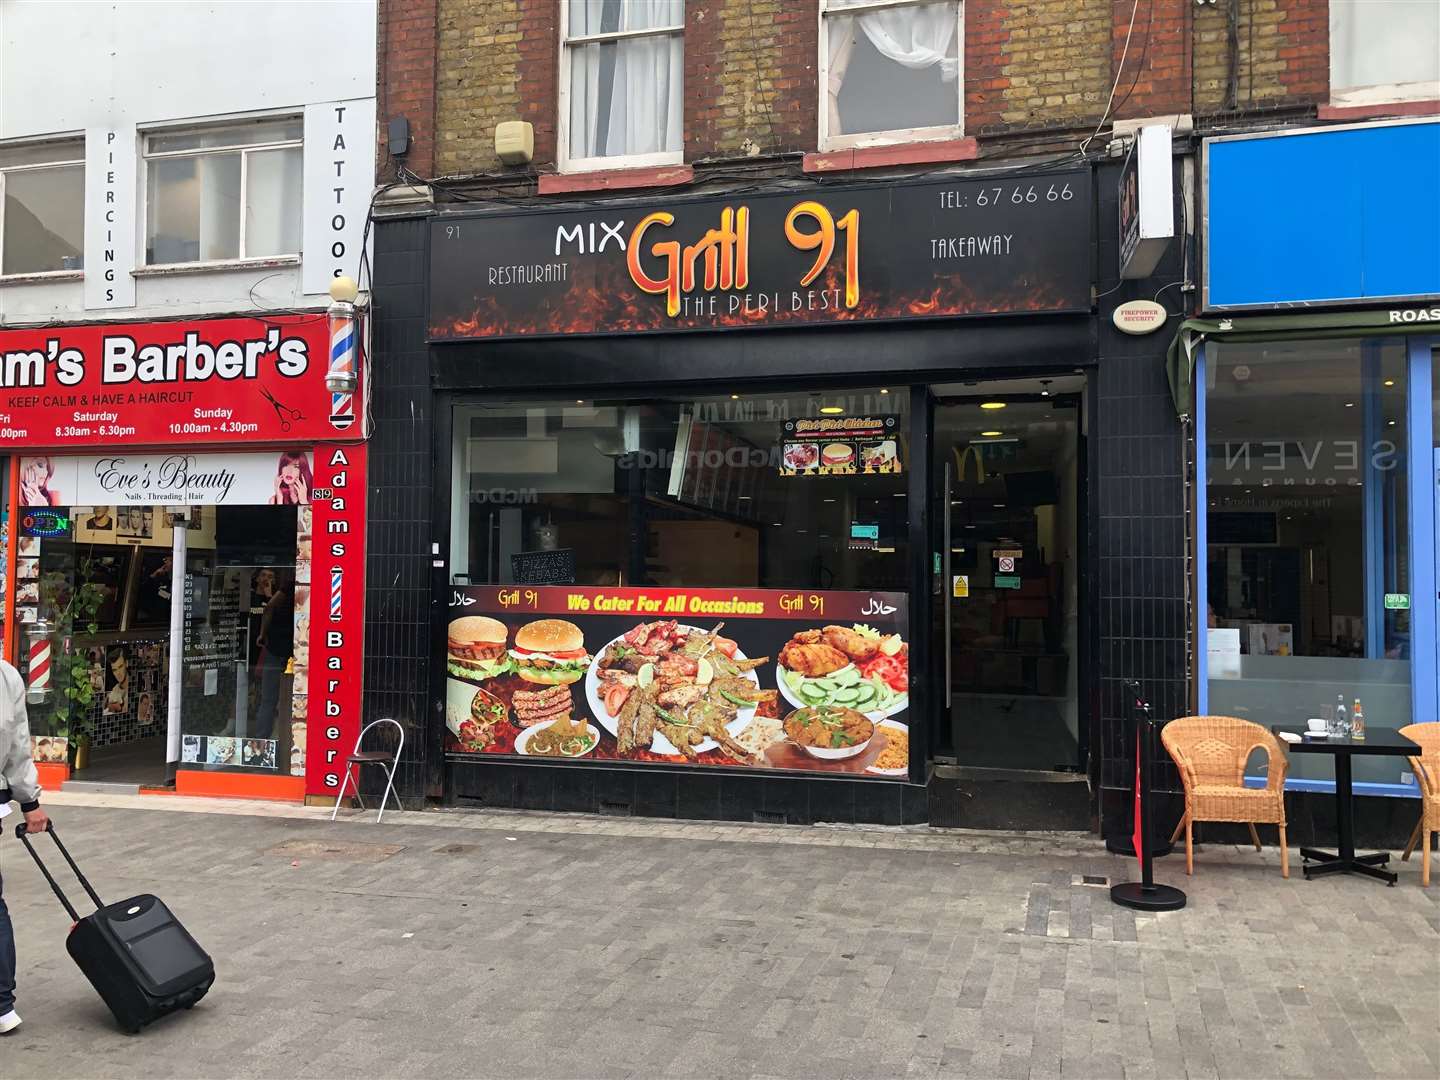 Mix Grill 91 in Week Street, Maidstone